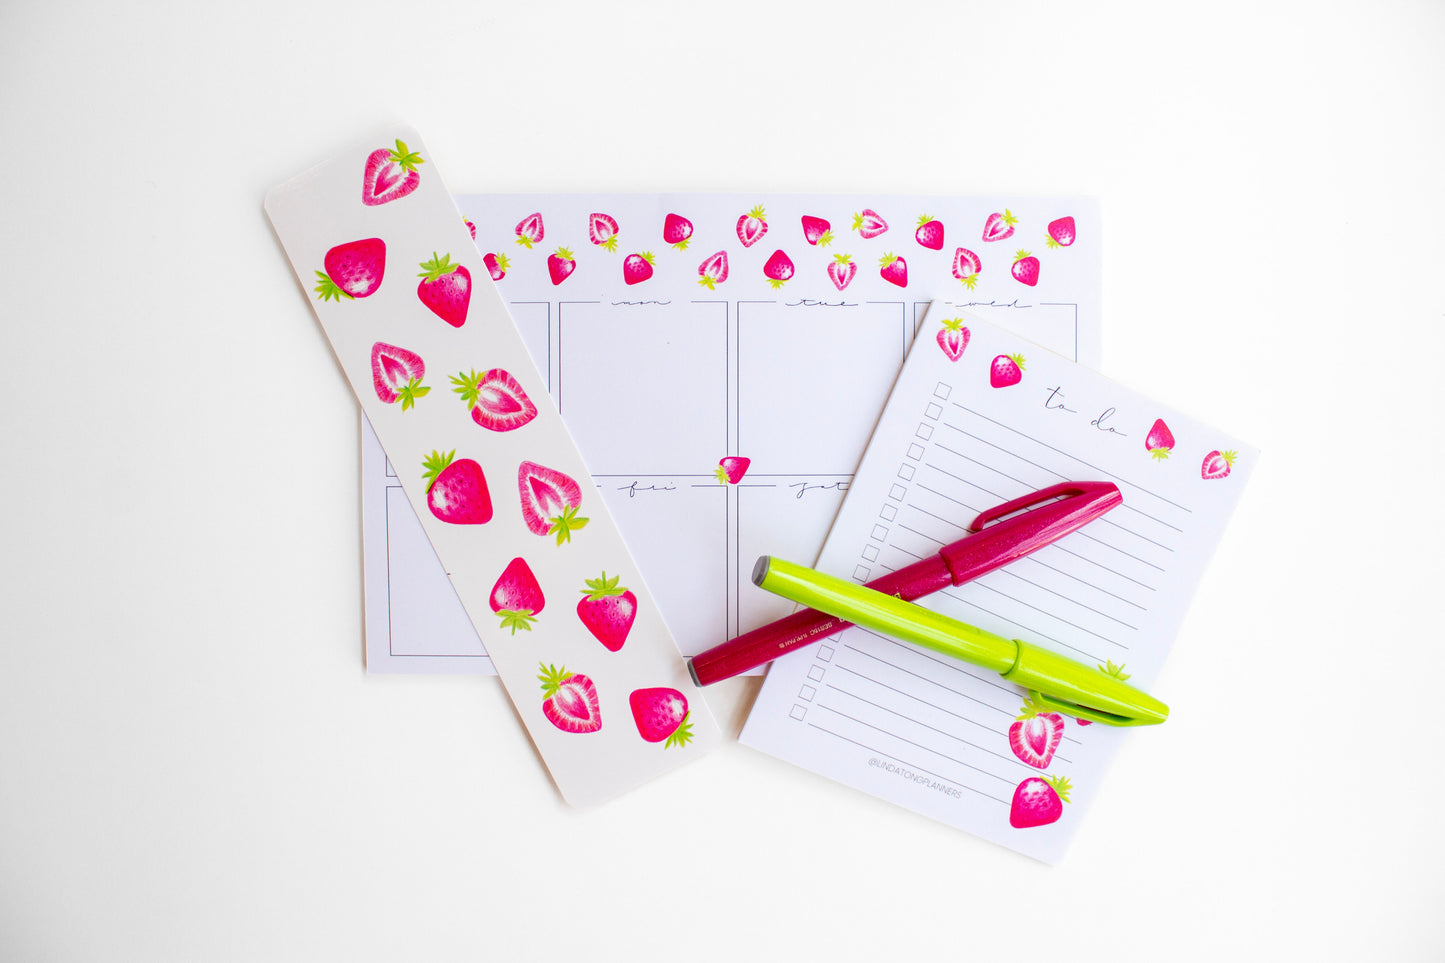 Strawberries To-Do List Notepad